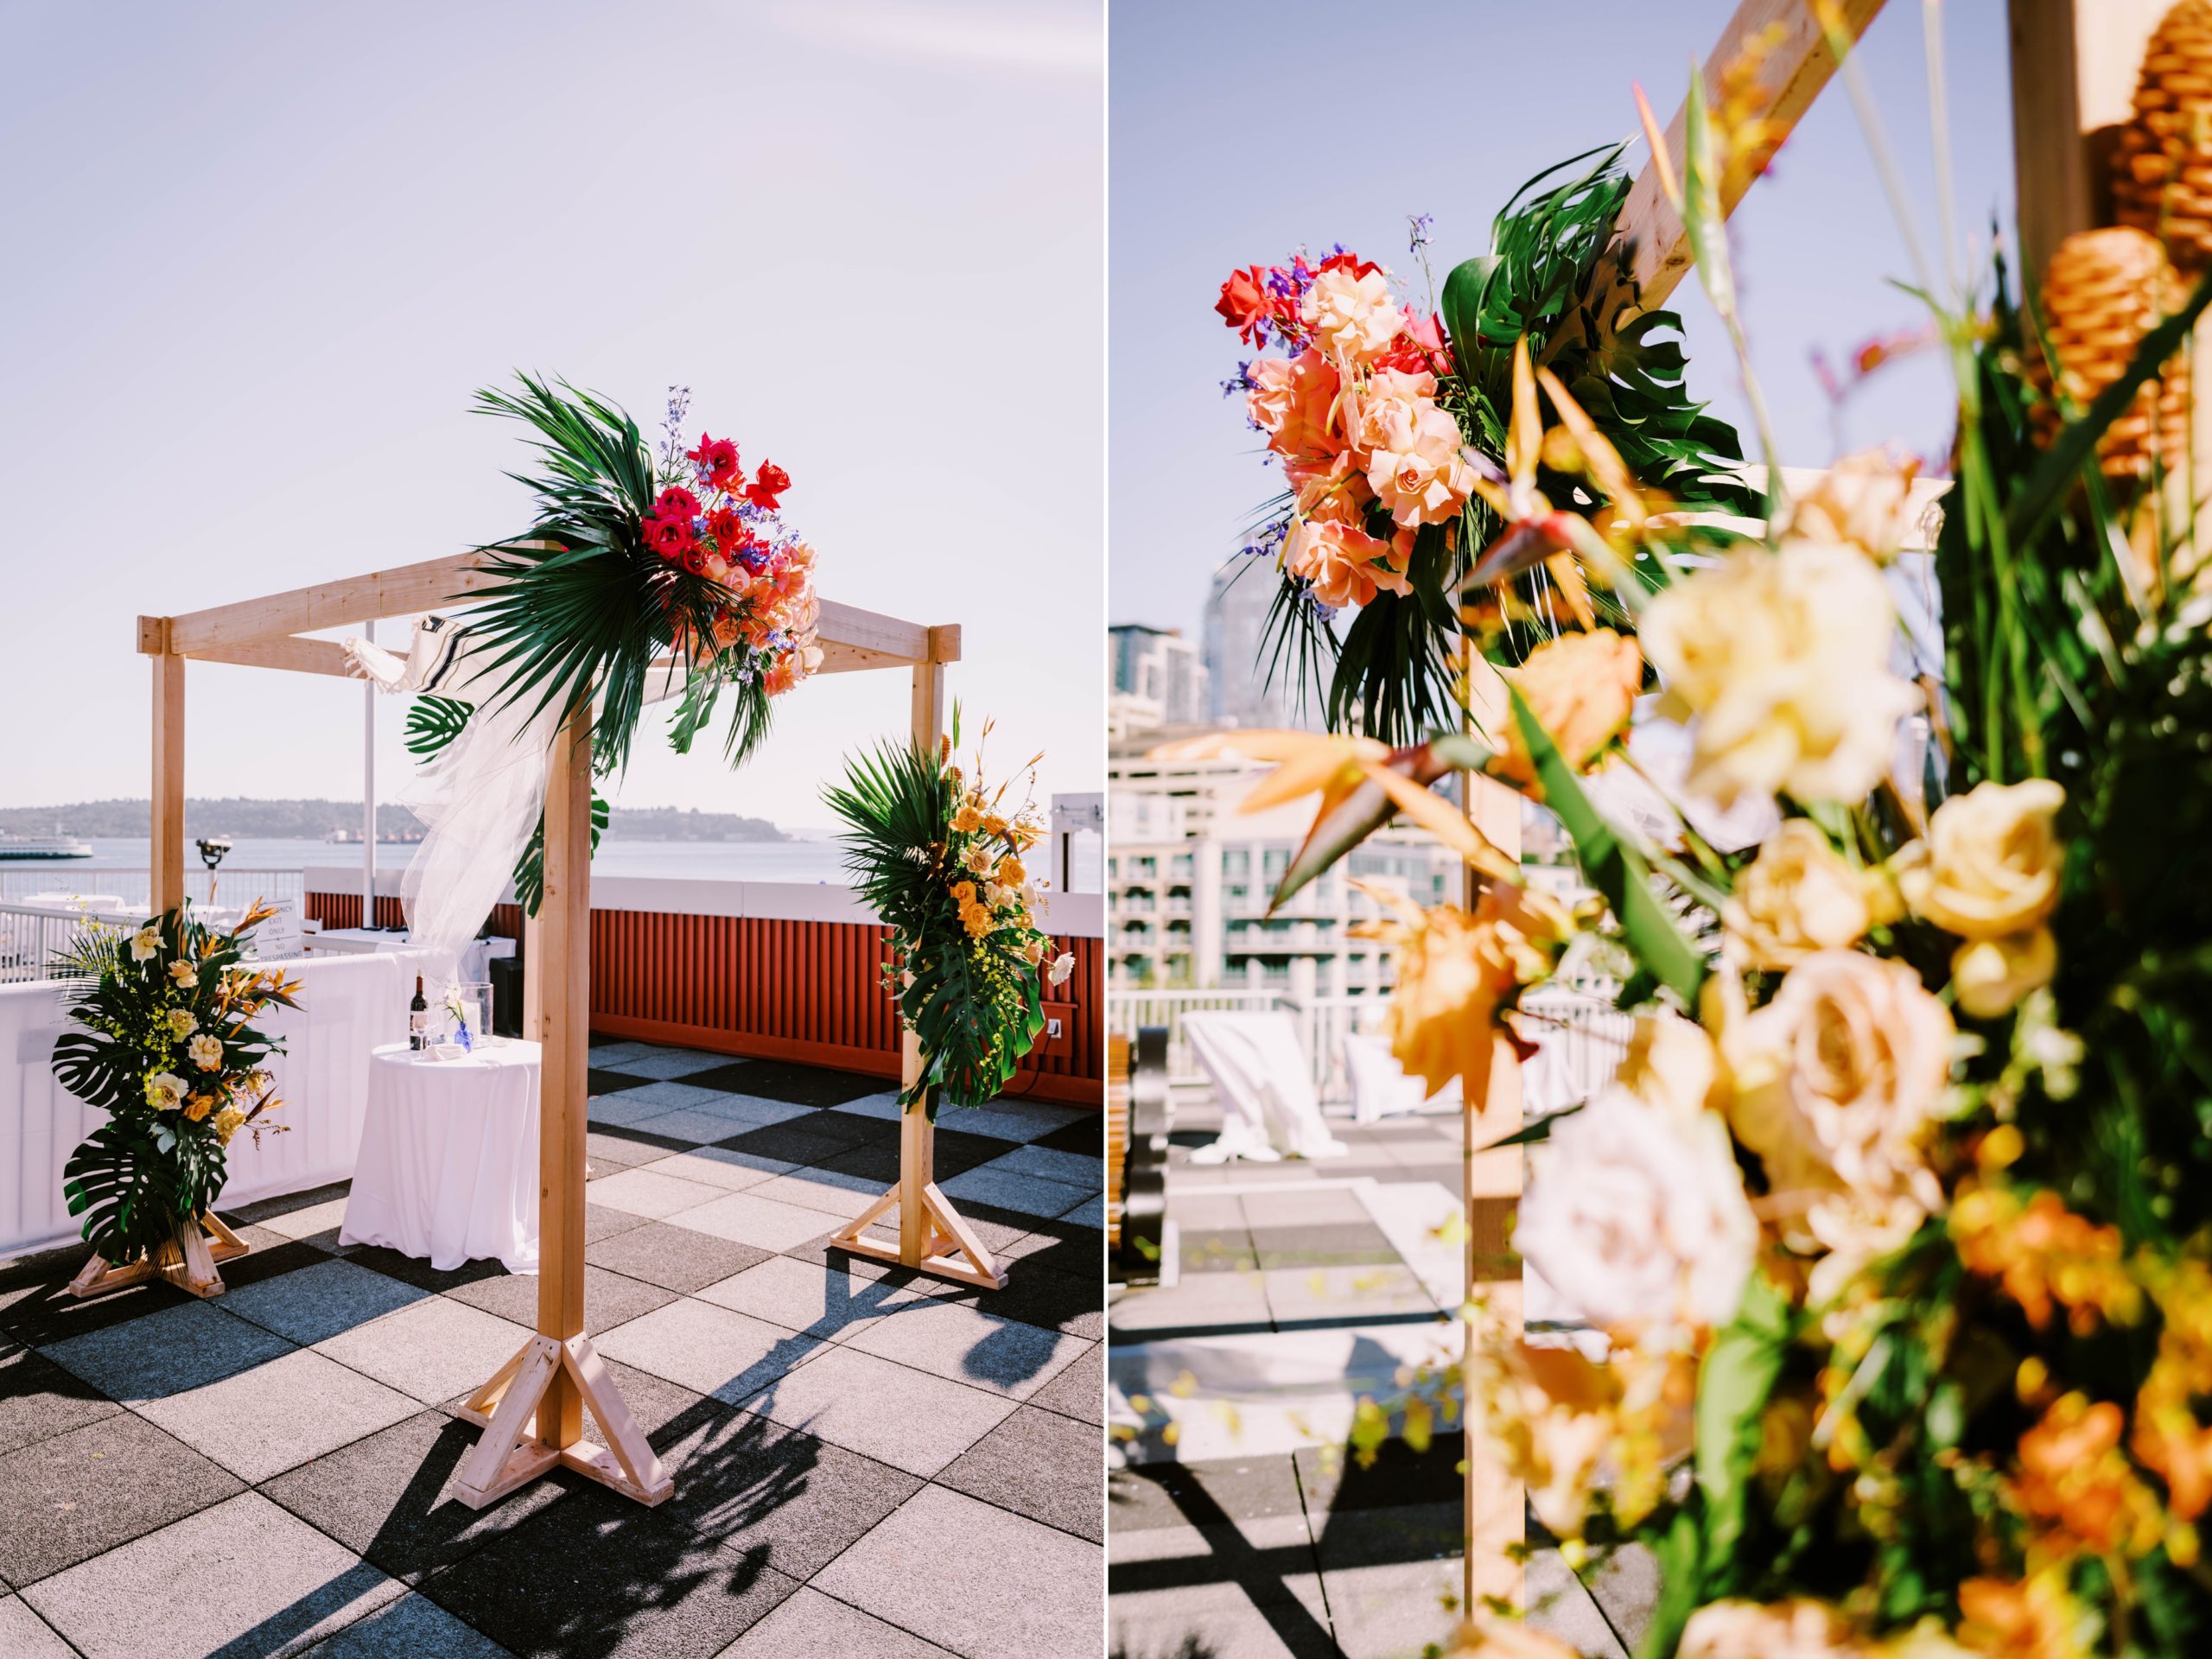 Joey and Dustin's wedding at Bell Harbor Conference Center rooftop, Summer 2022. Florals by Bahtoh.